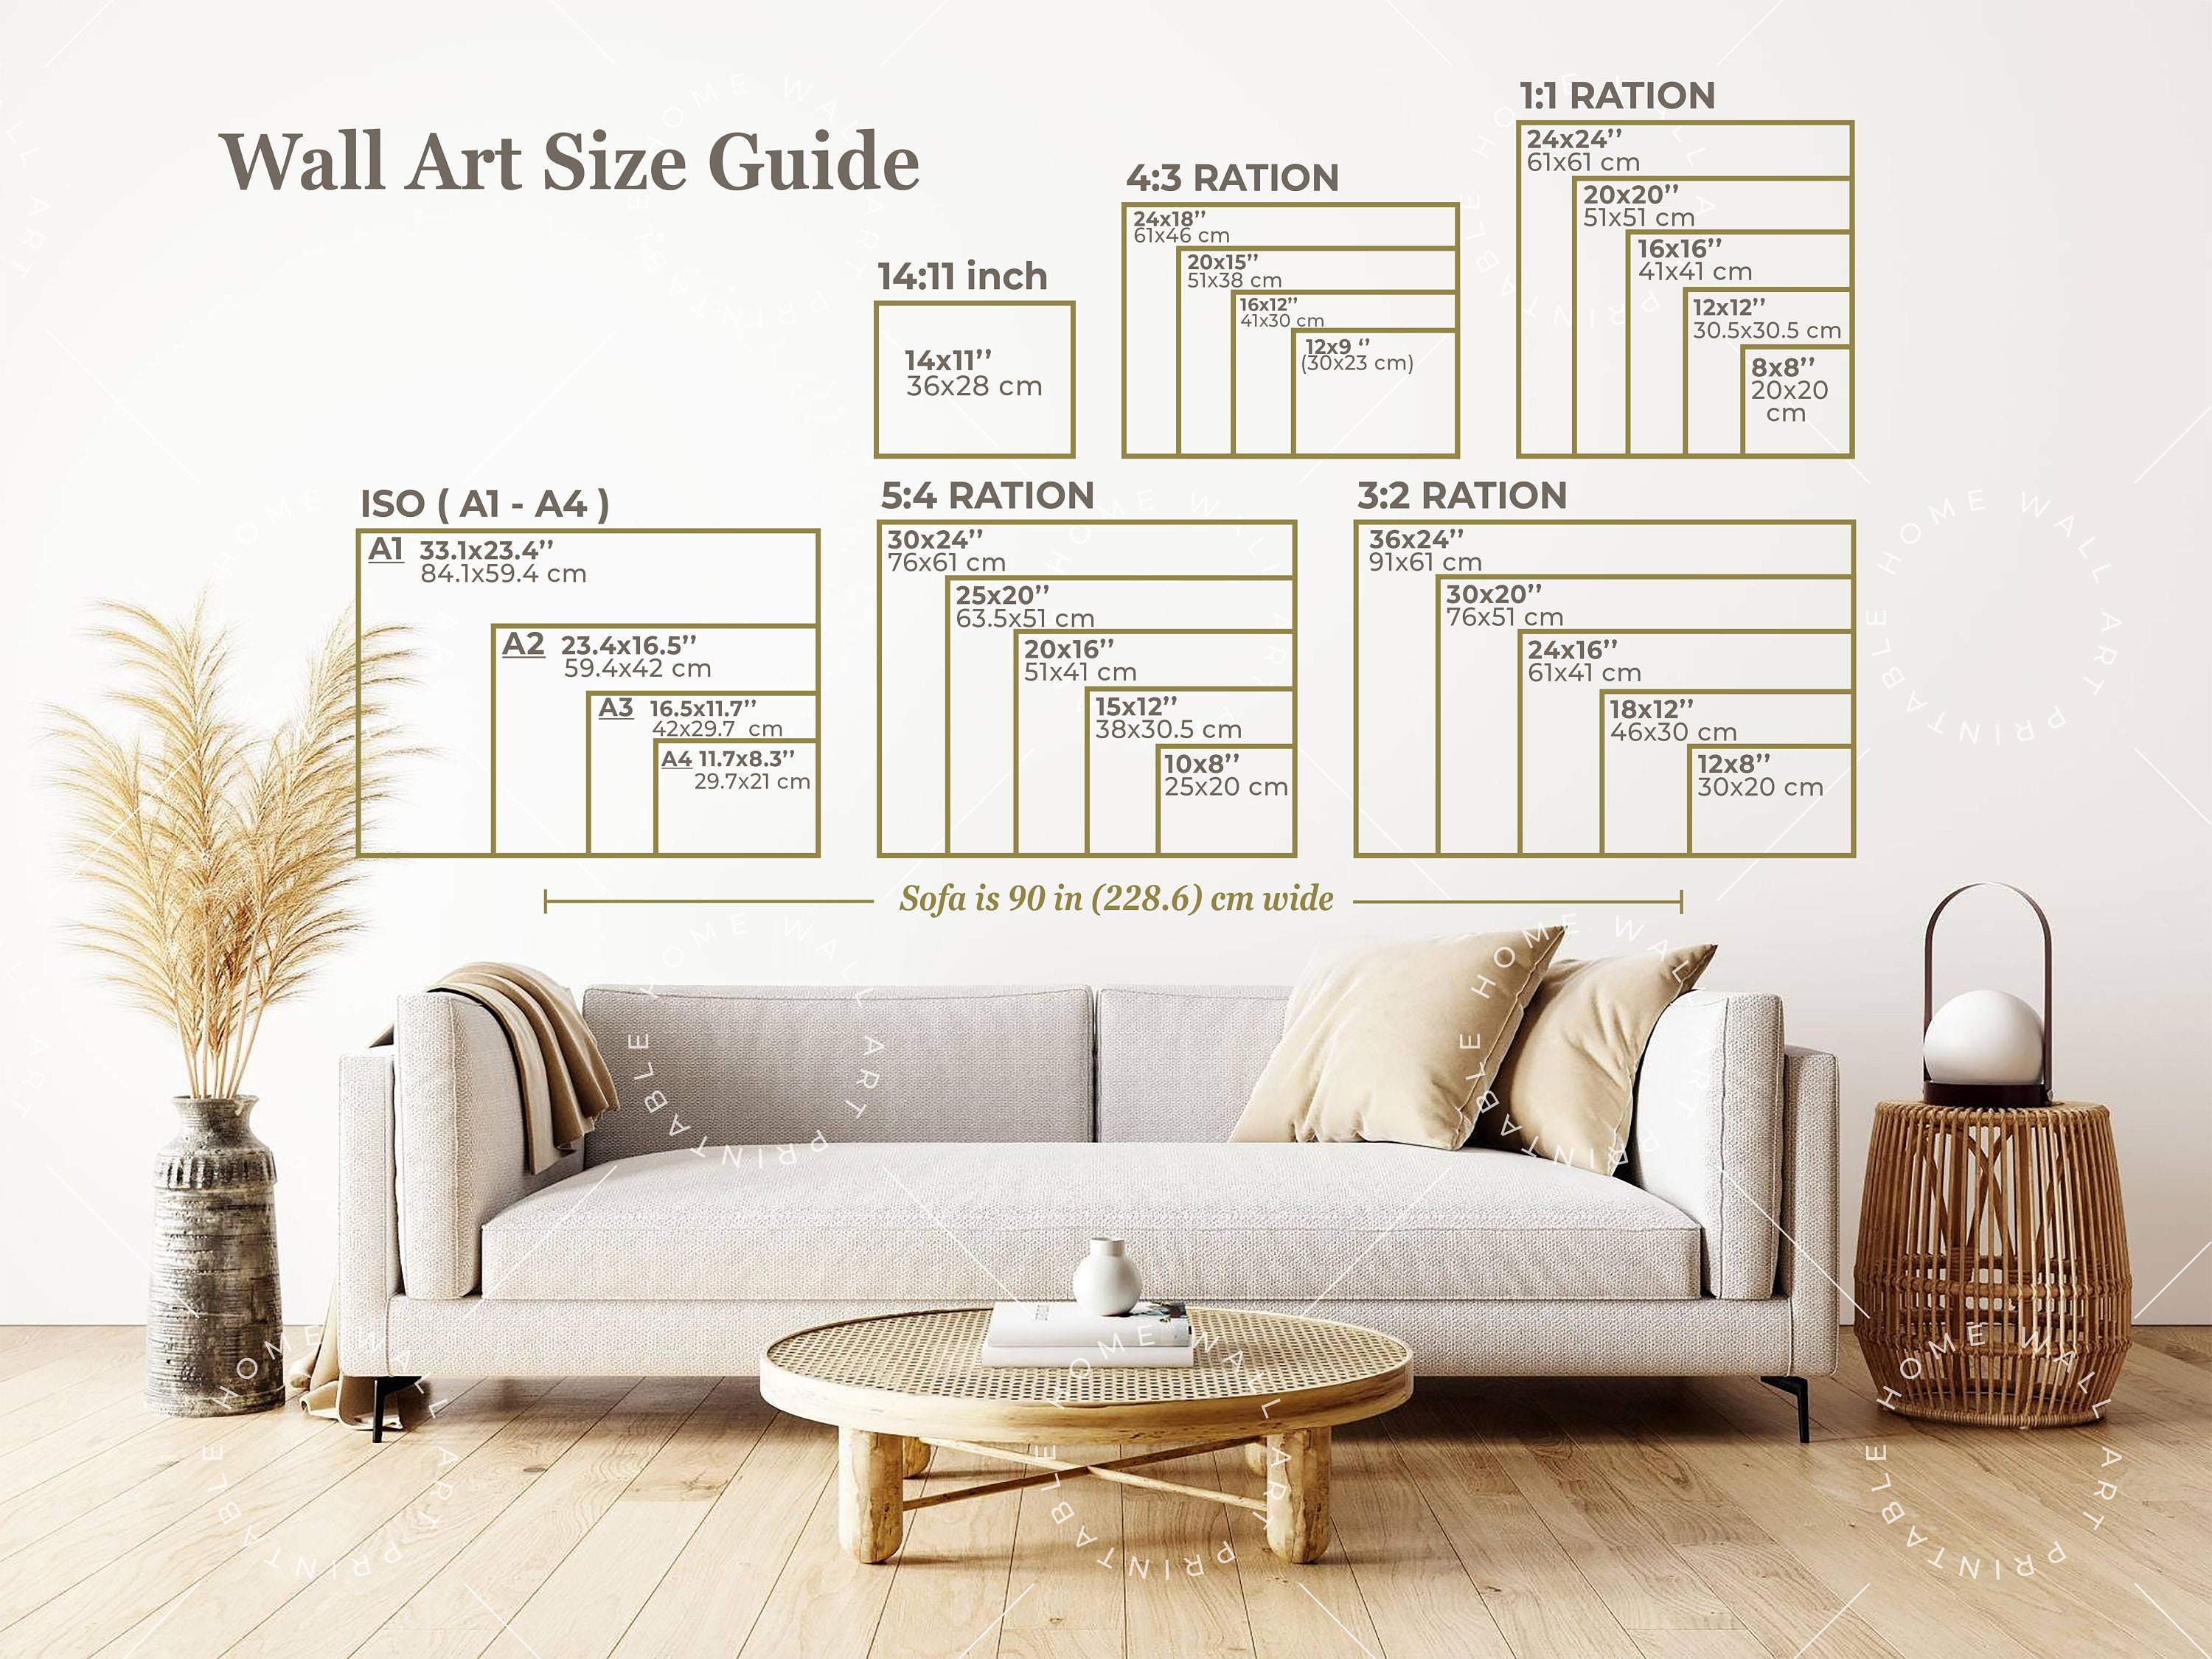 Wall Art Size Guide, Poster Size Chart, Photo Frame Sizes, Canvas